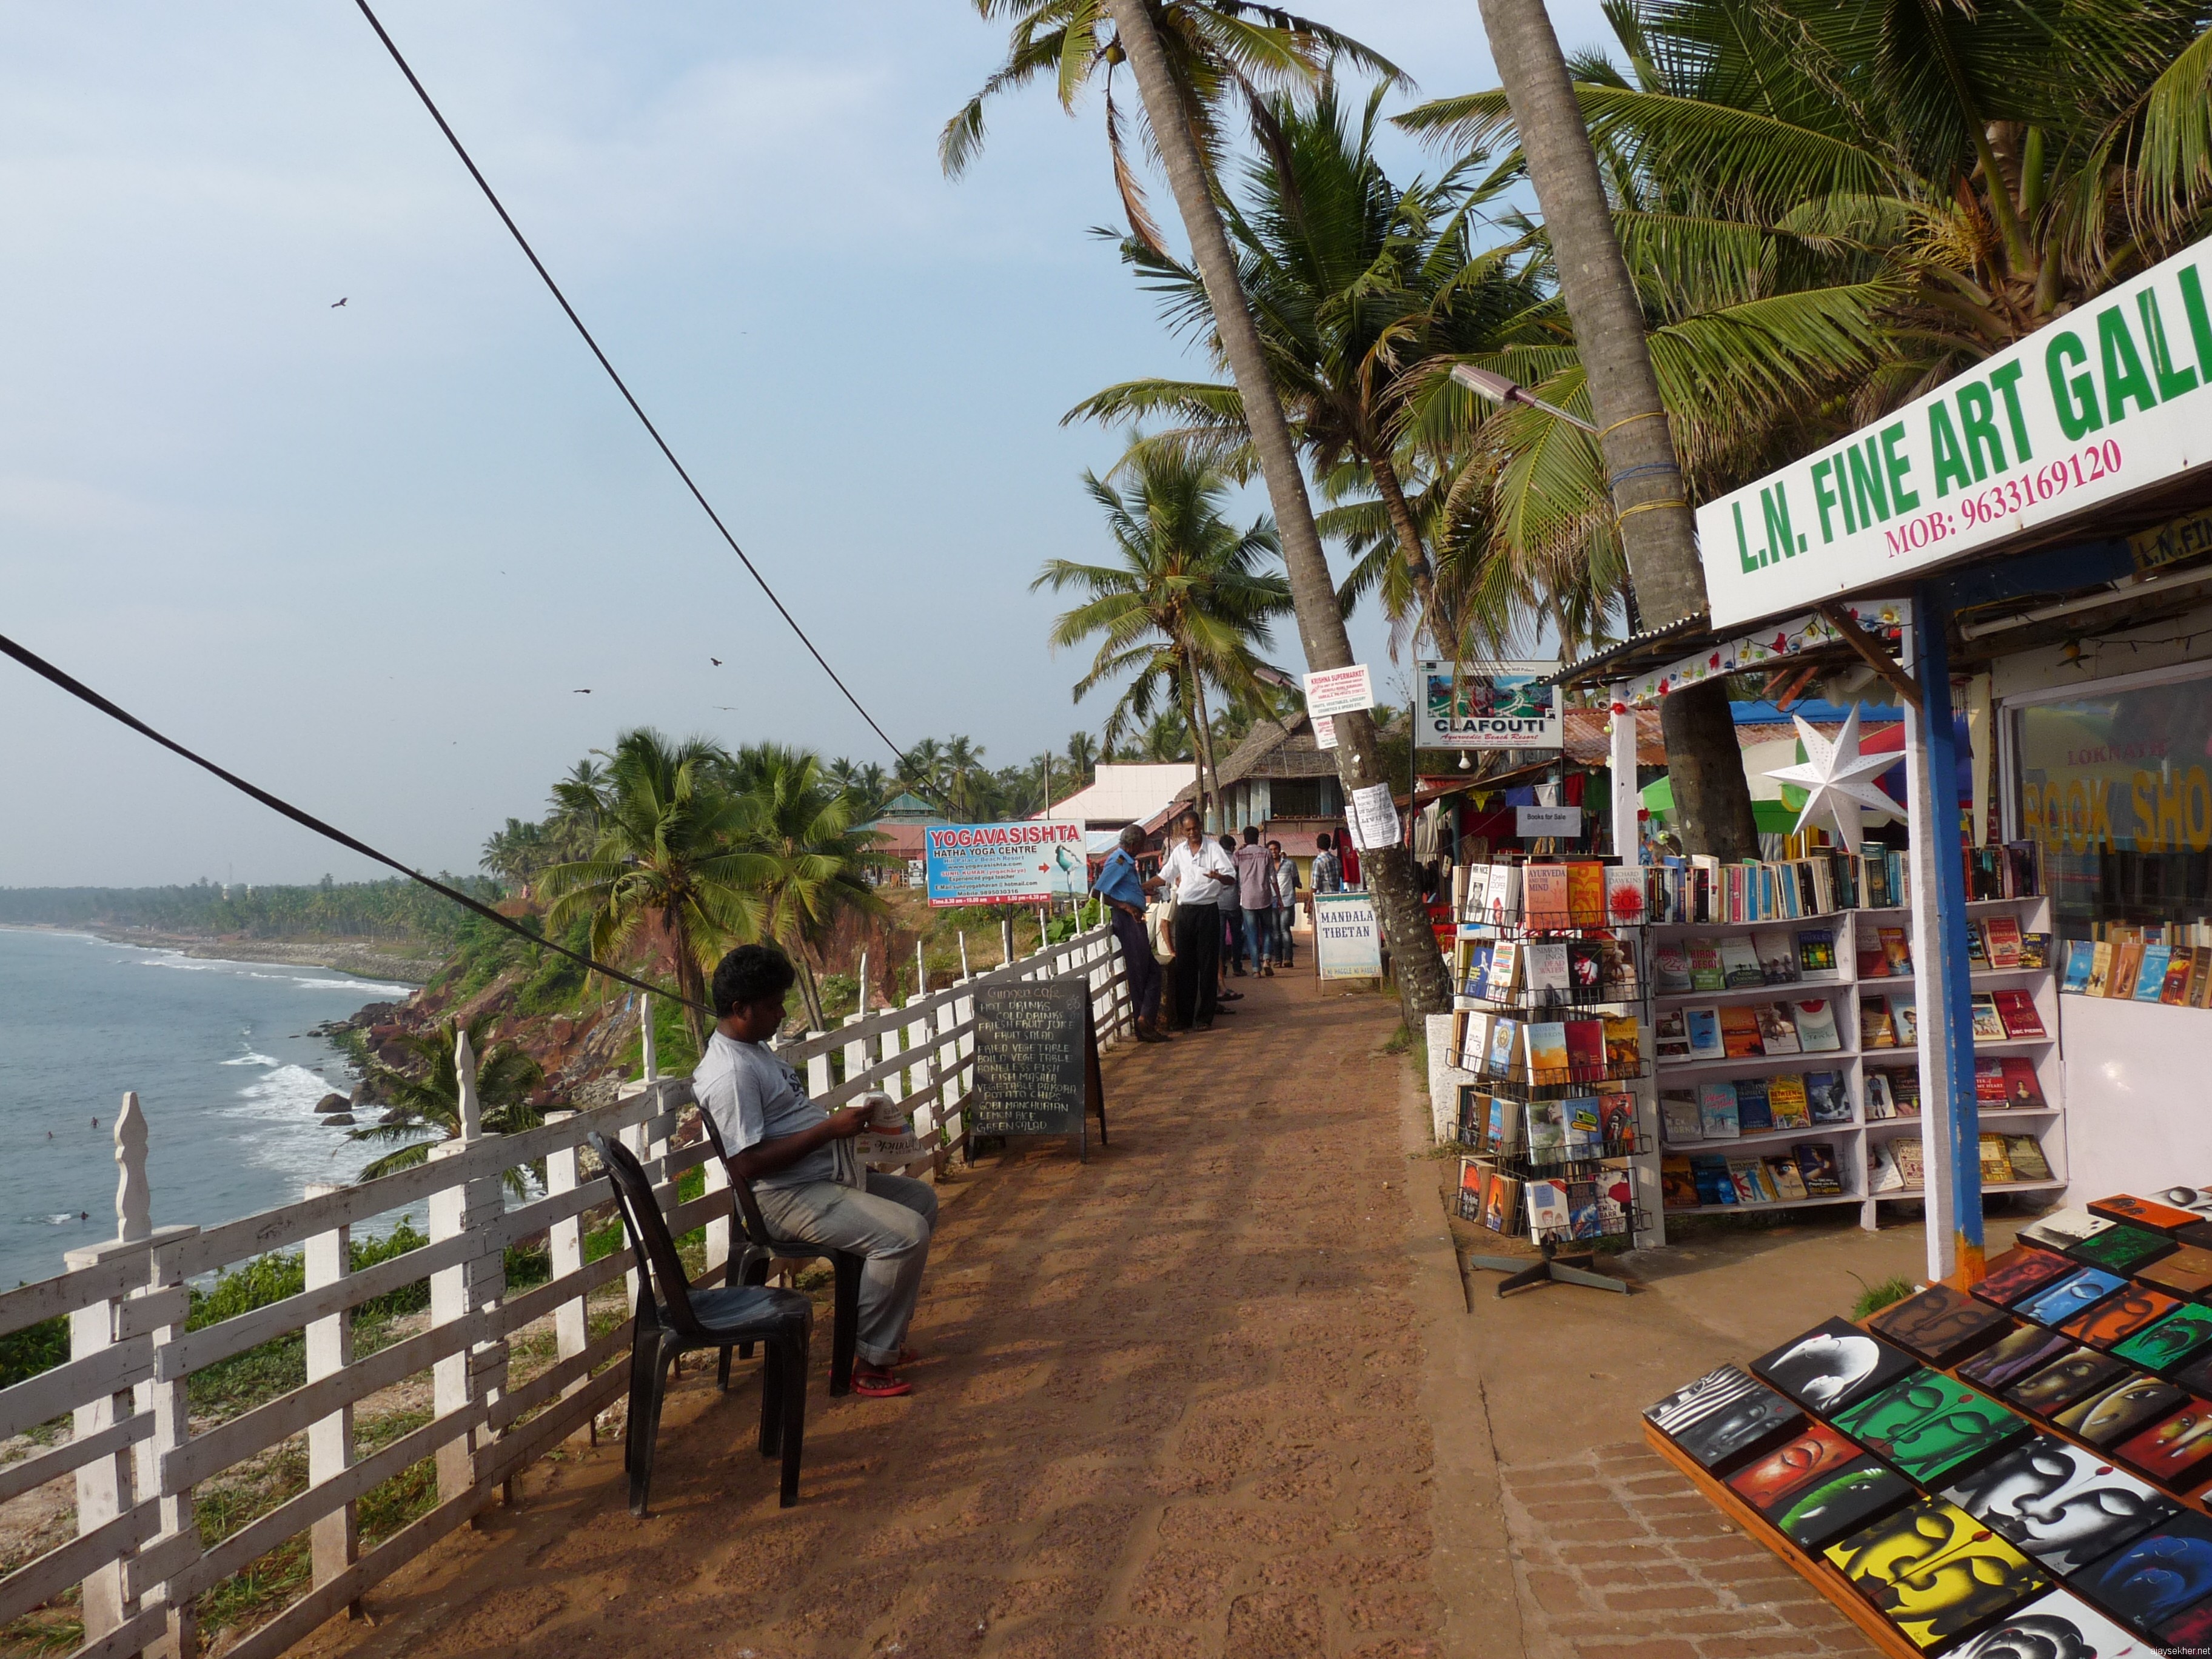 Bounty of nature and culture; popular book shops and art galleries on the Varkala cliff awaiting travelers from across the globe.